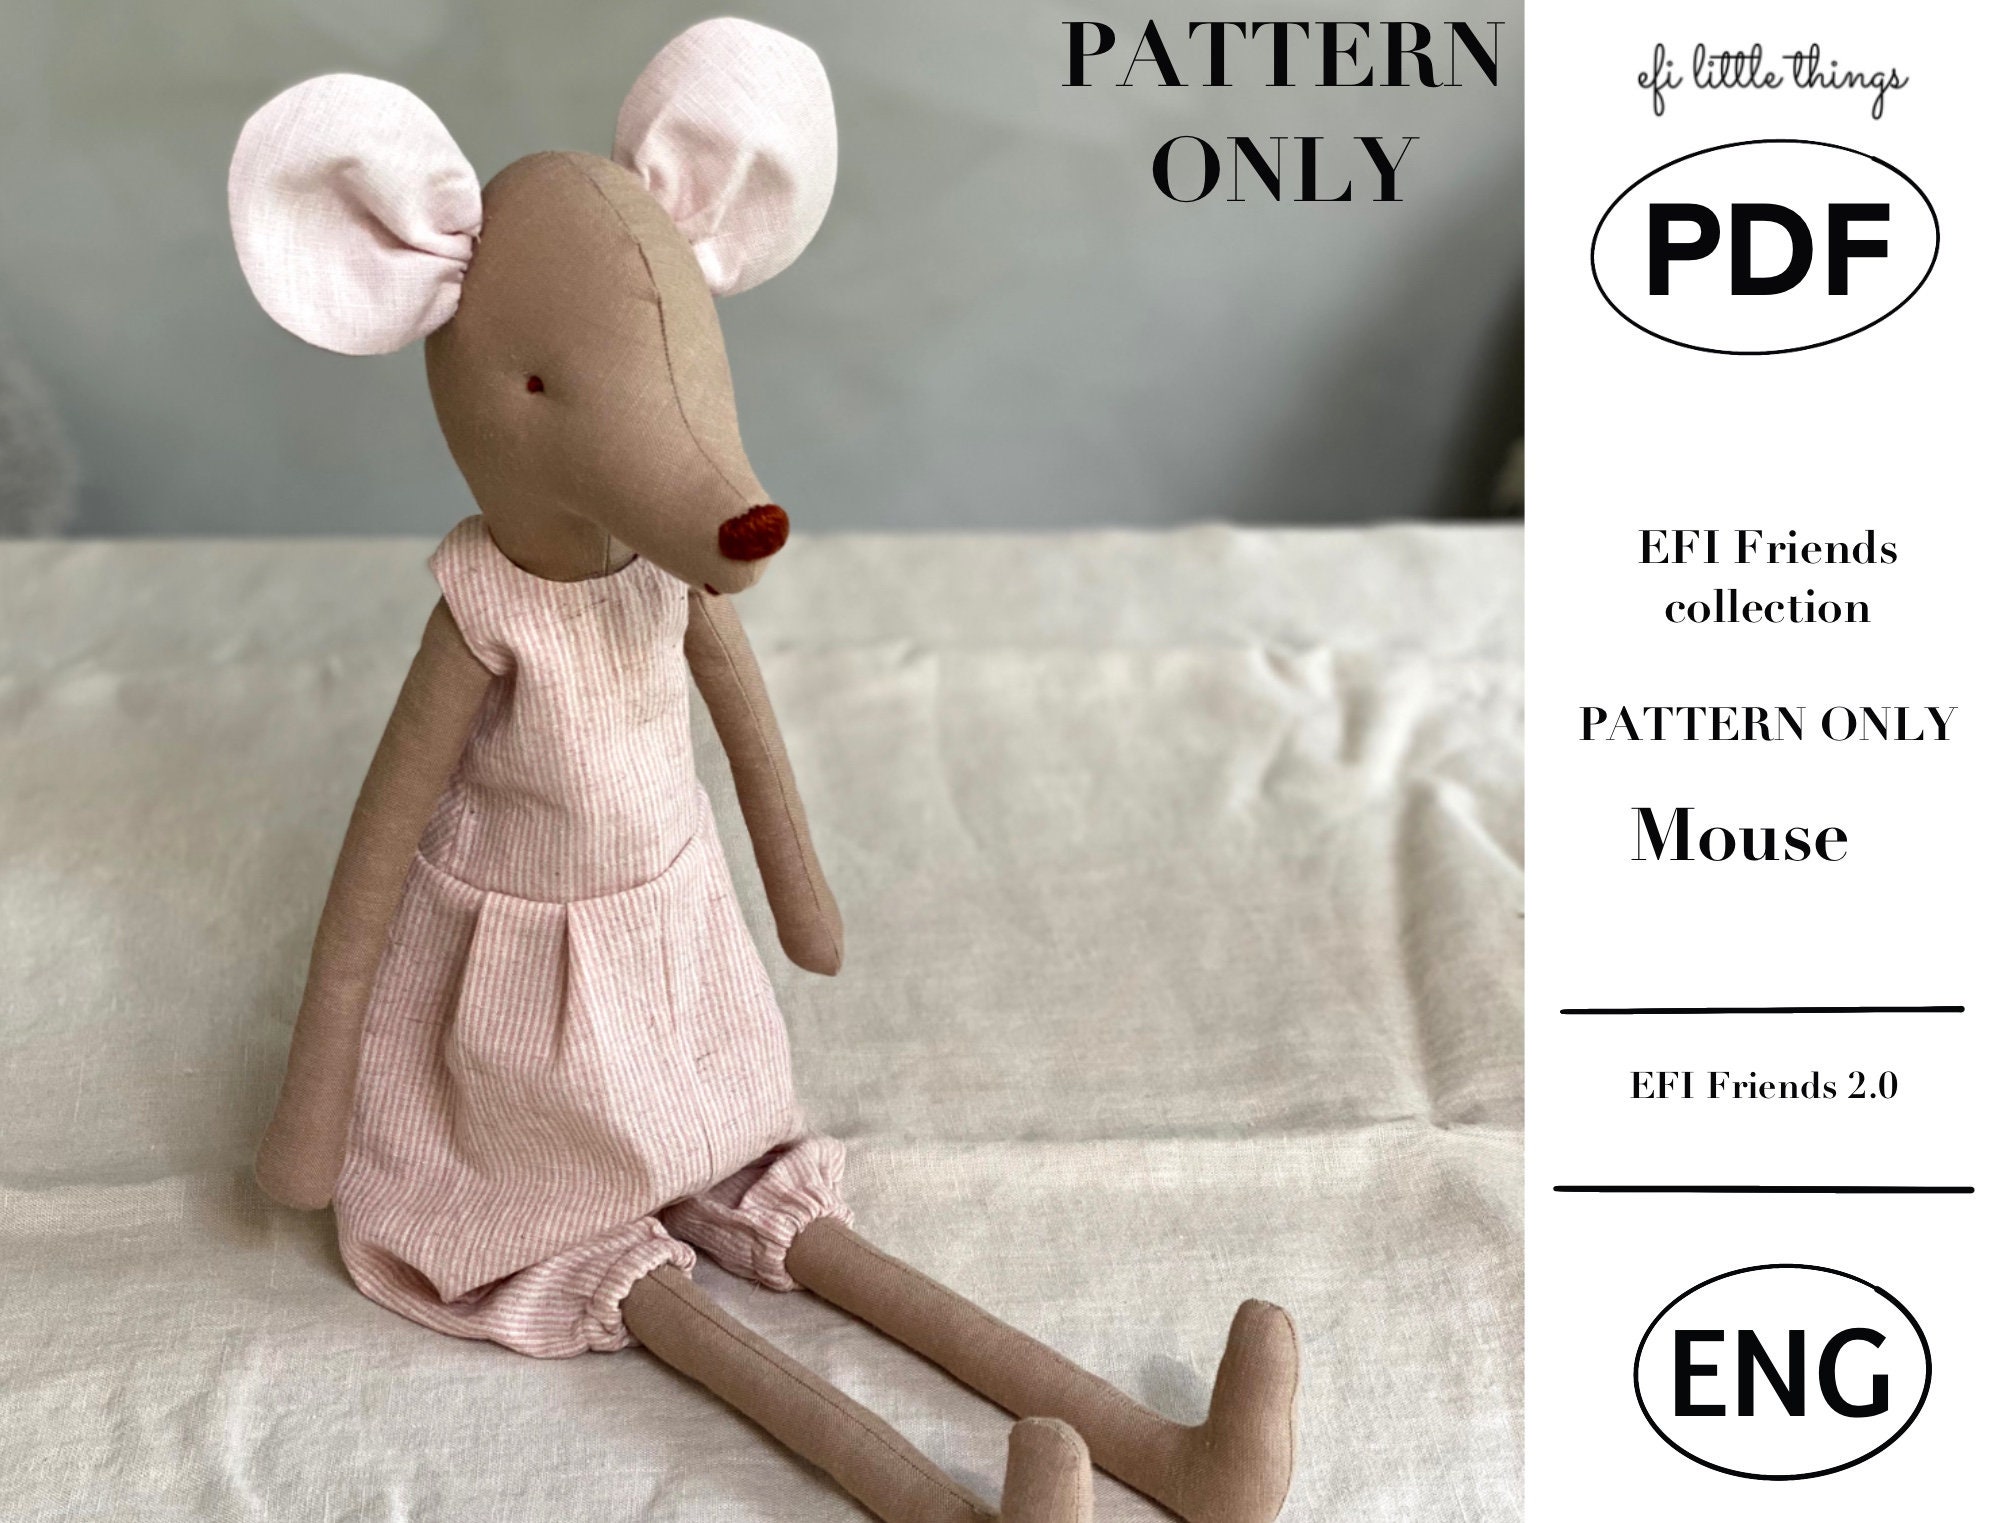 27 Best Sewing Patterns for Stuffed Animal Toys (11 Free!)